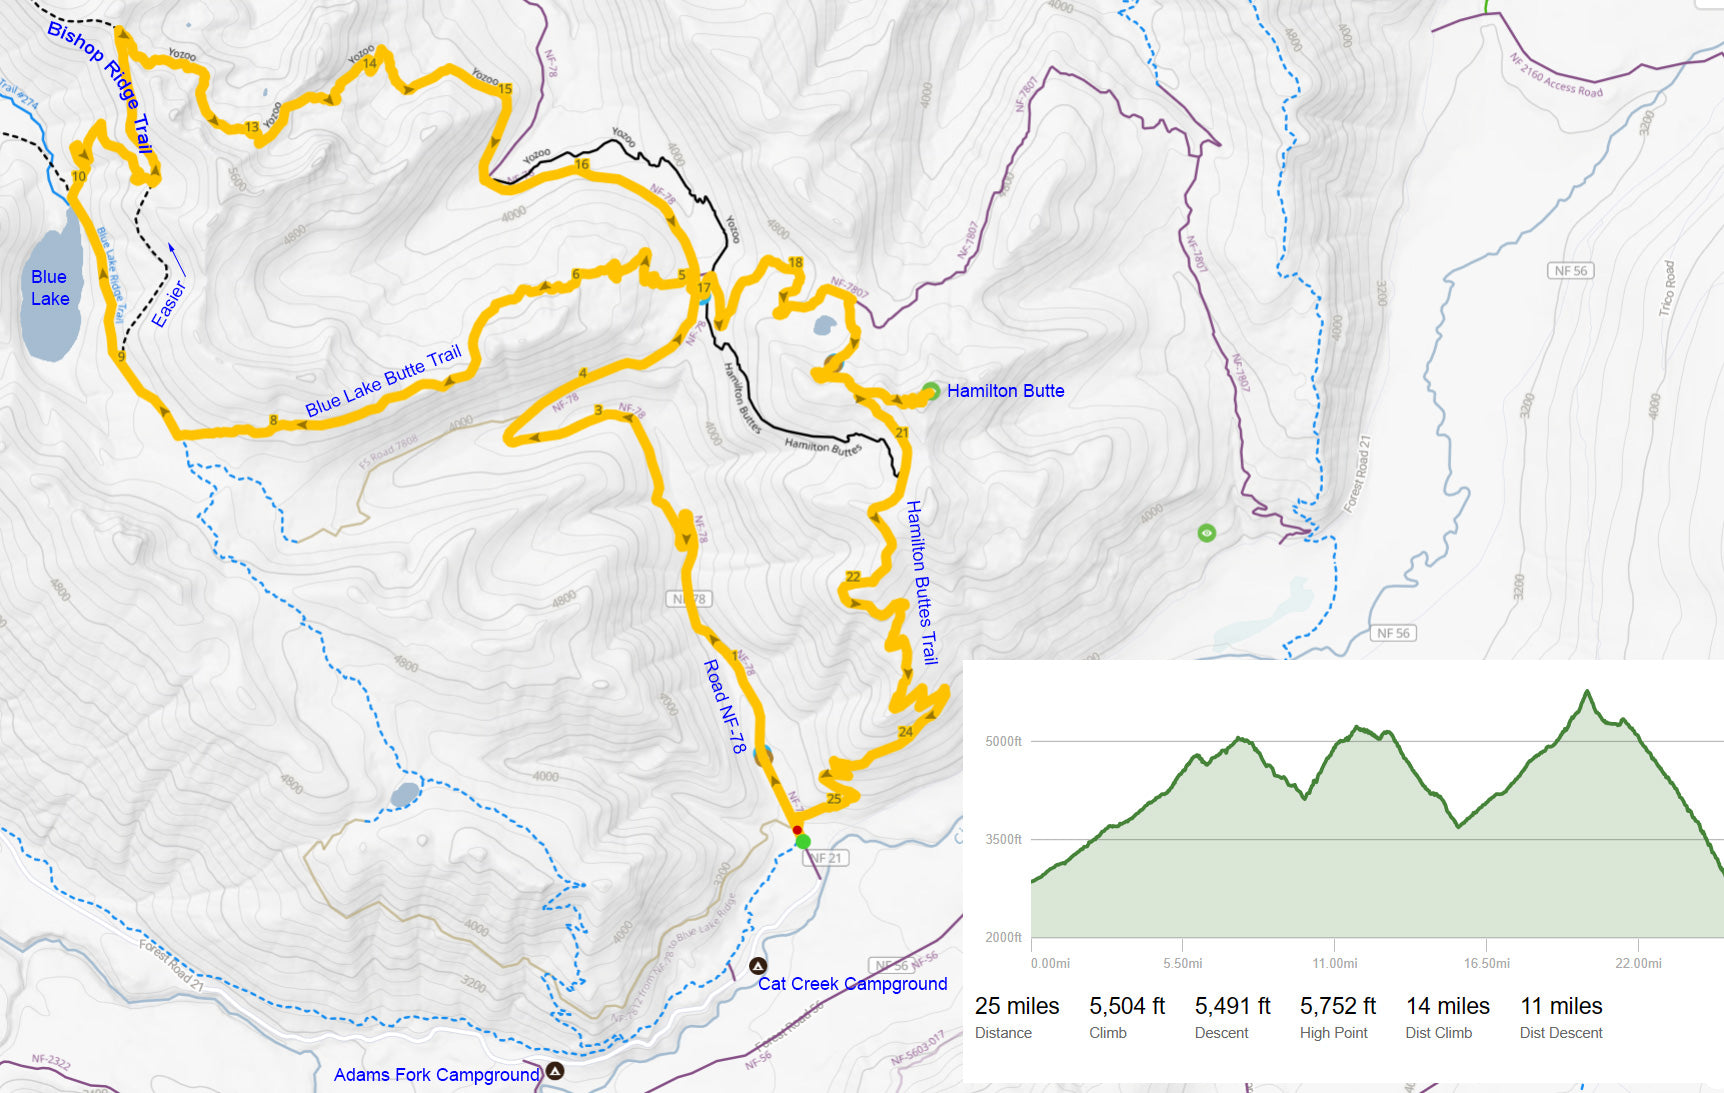 Map of Yozoo - Hamilton Buttes mountain bike ride in the Gifford Pinchot National Forest